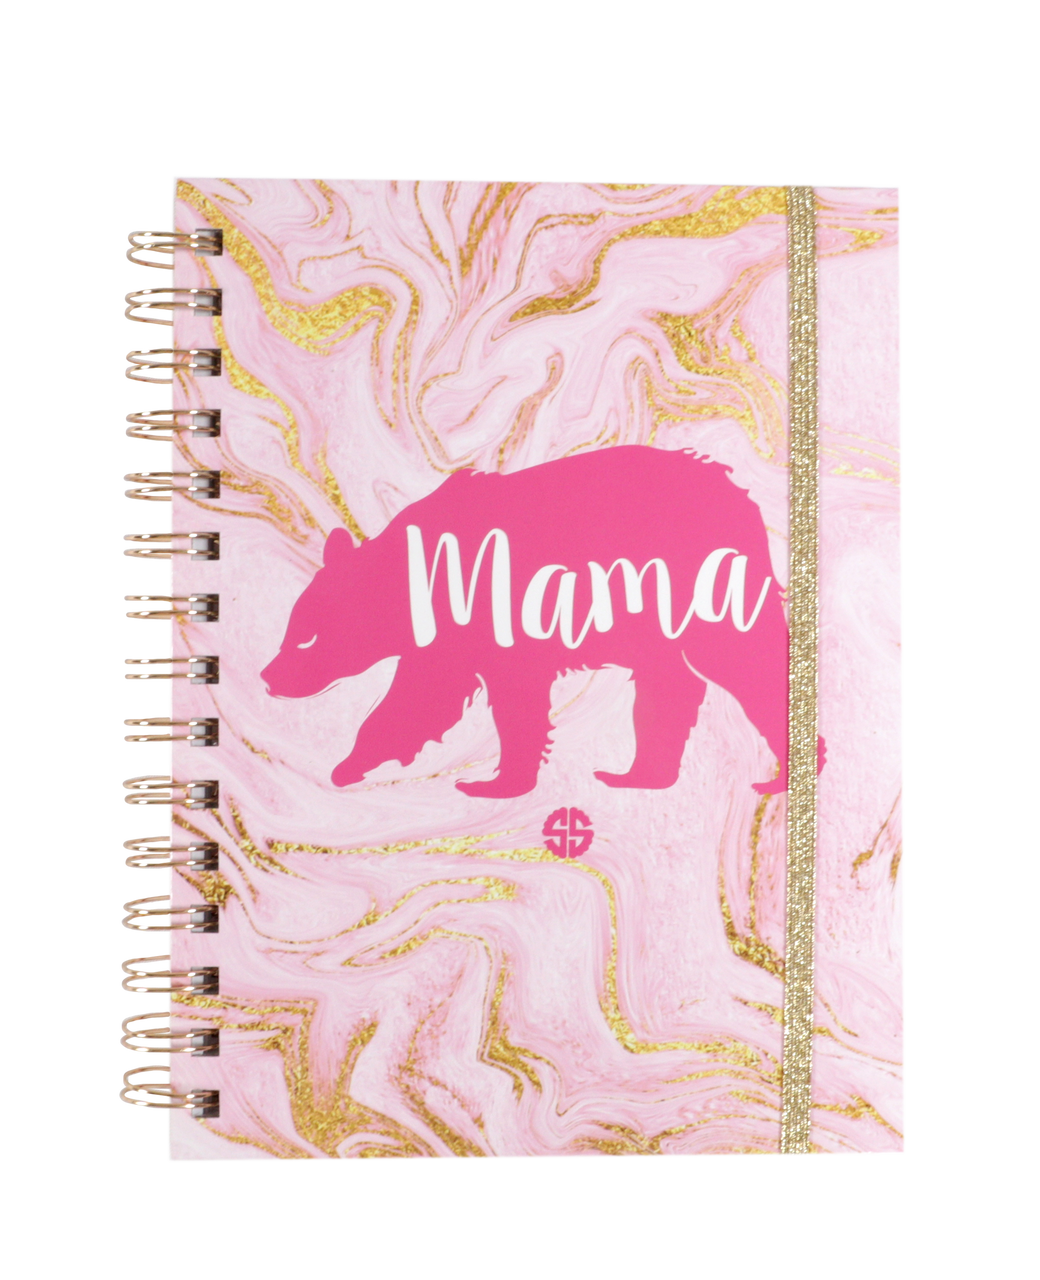 https://cdn2.bigcommerce.com/n-pktq5q/5n5n8ti/products/1502/images/2680/SP19-NOTEBOOK-MAMABEAR-simply-southern__35589.1556999710.1280.1280.png?c=2